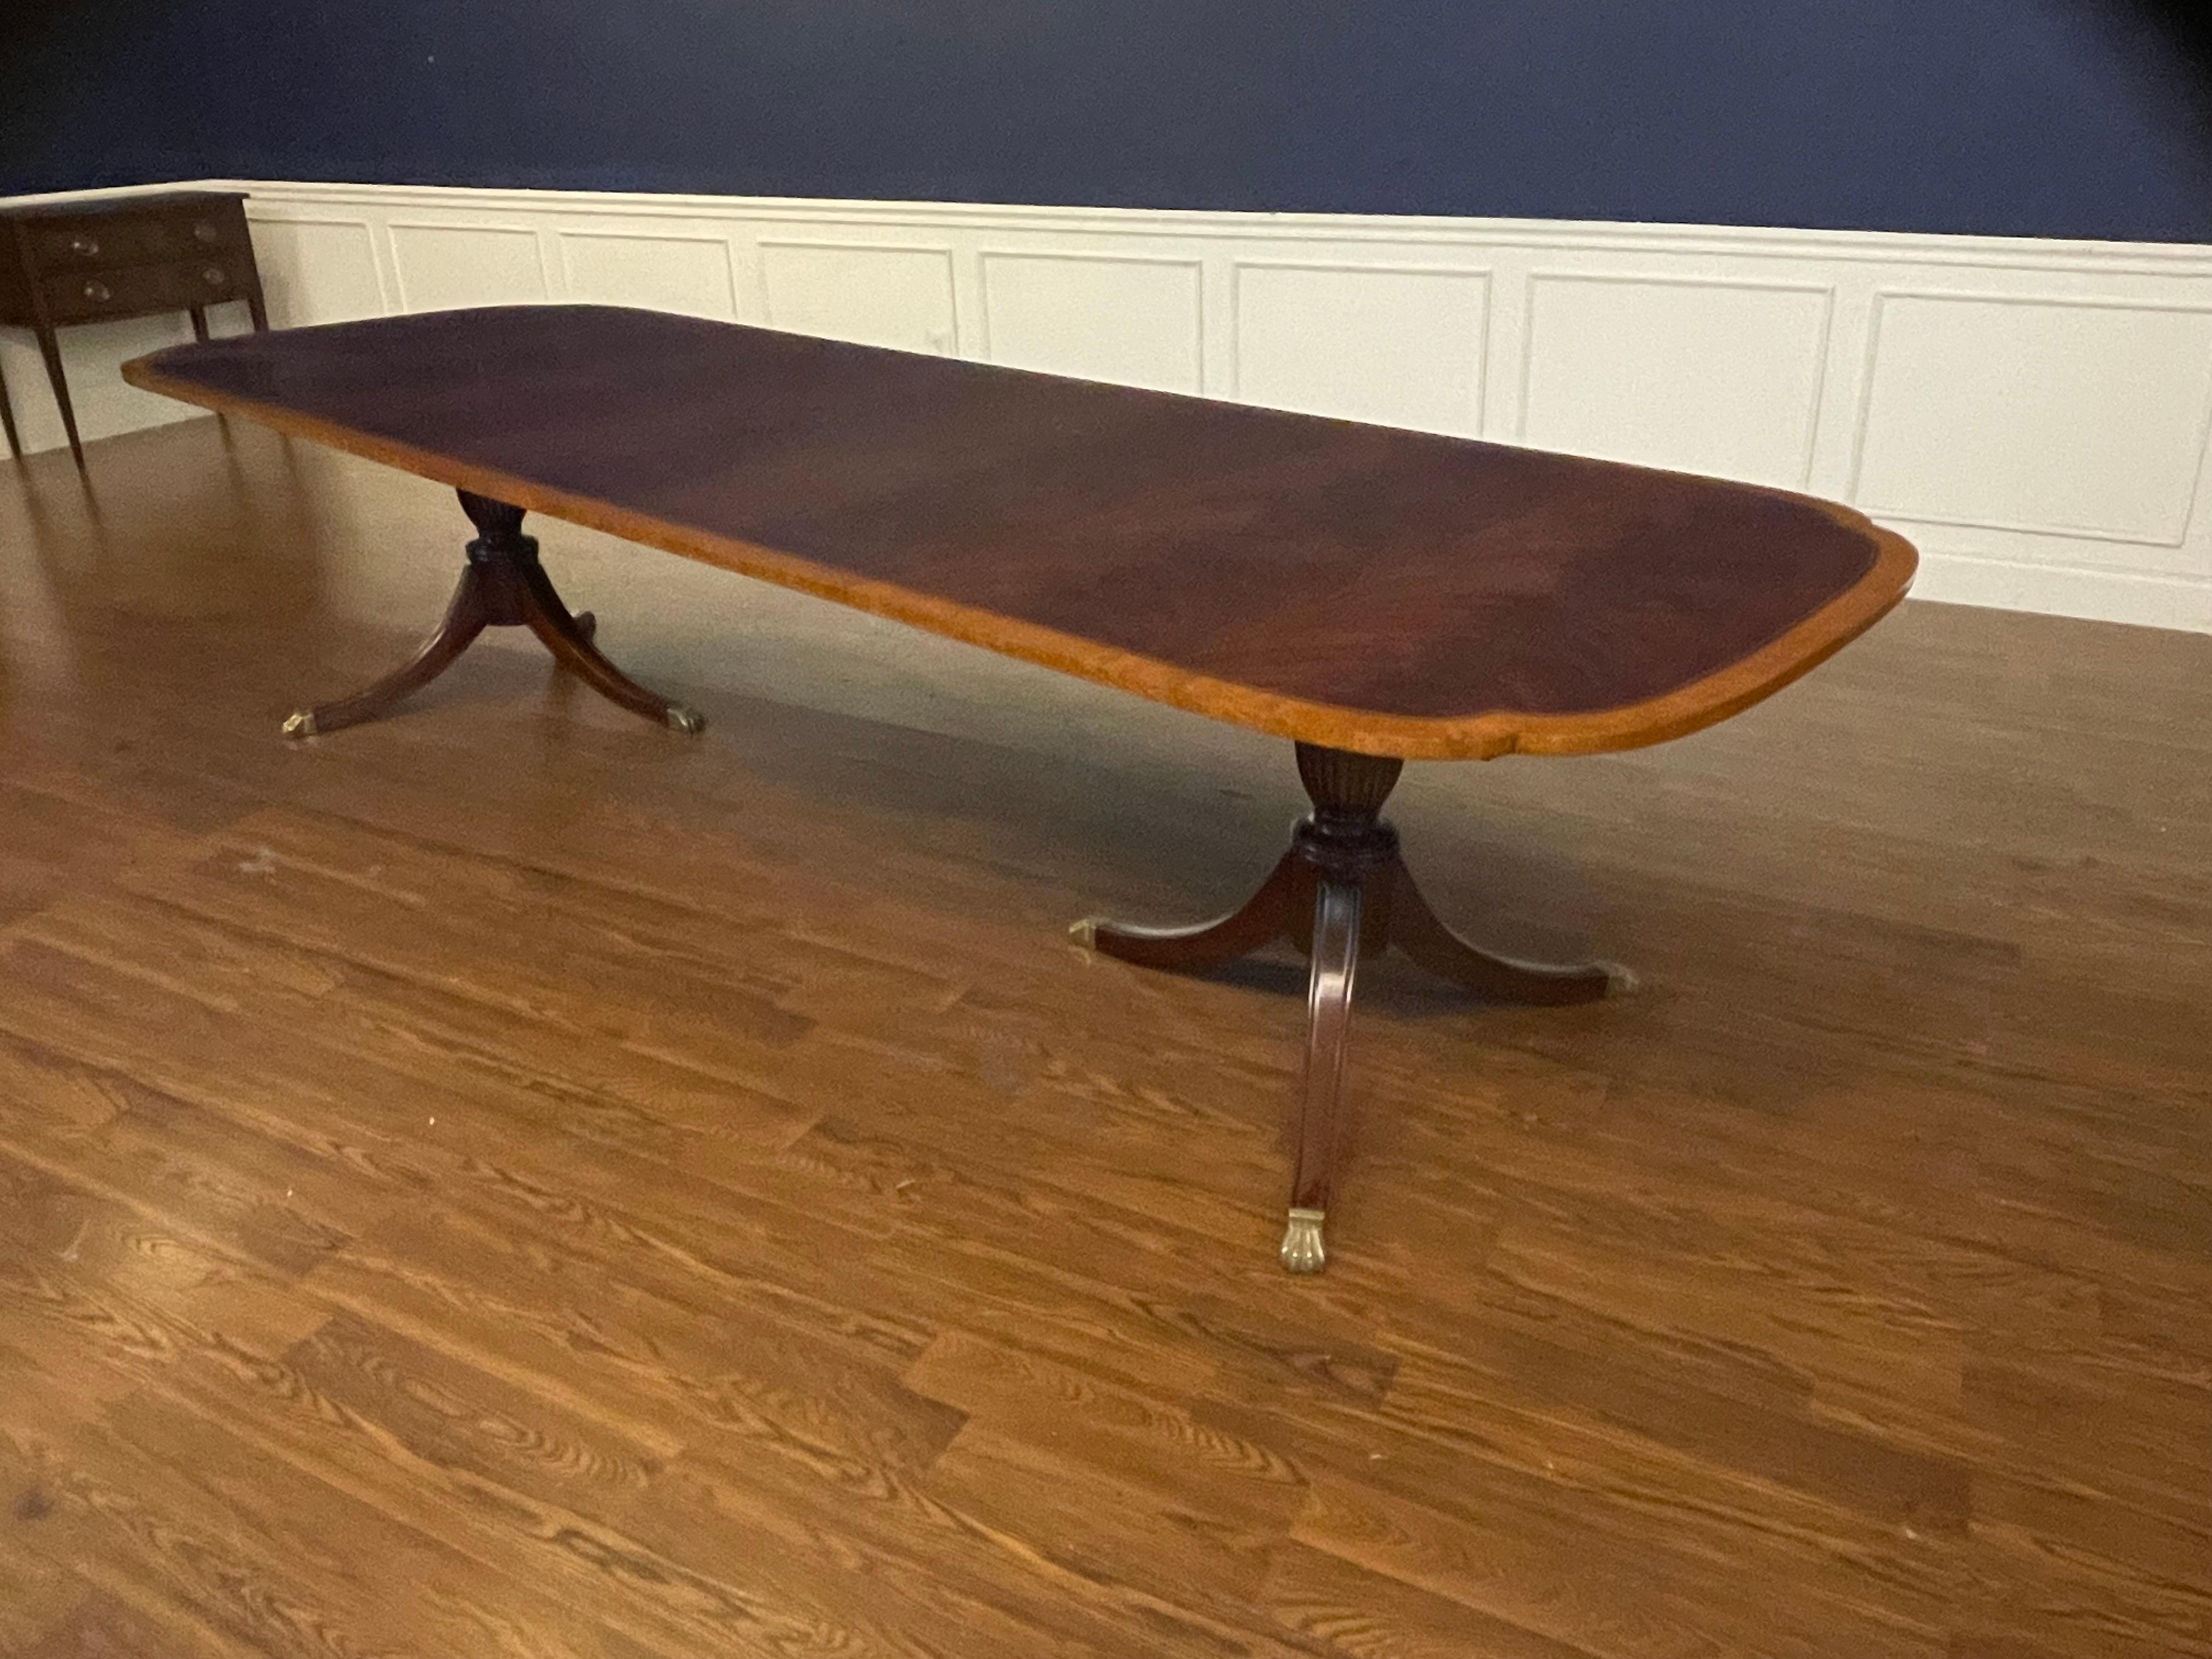 Mahogany Scallop Cornered Dining Table by Leighton Hall - Showroom Sample 9